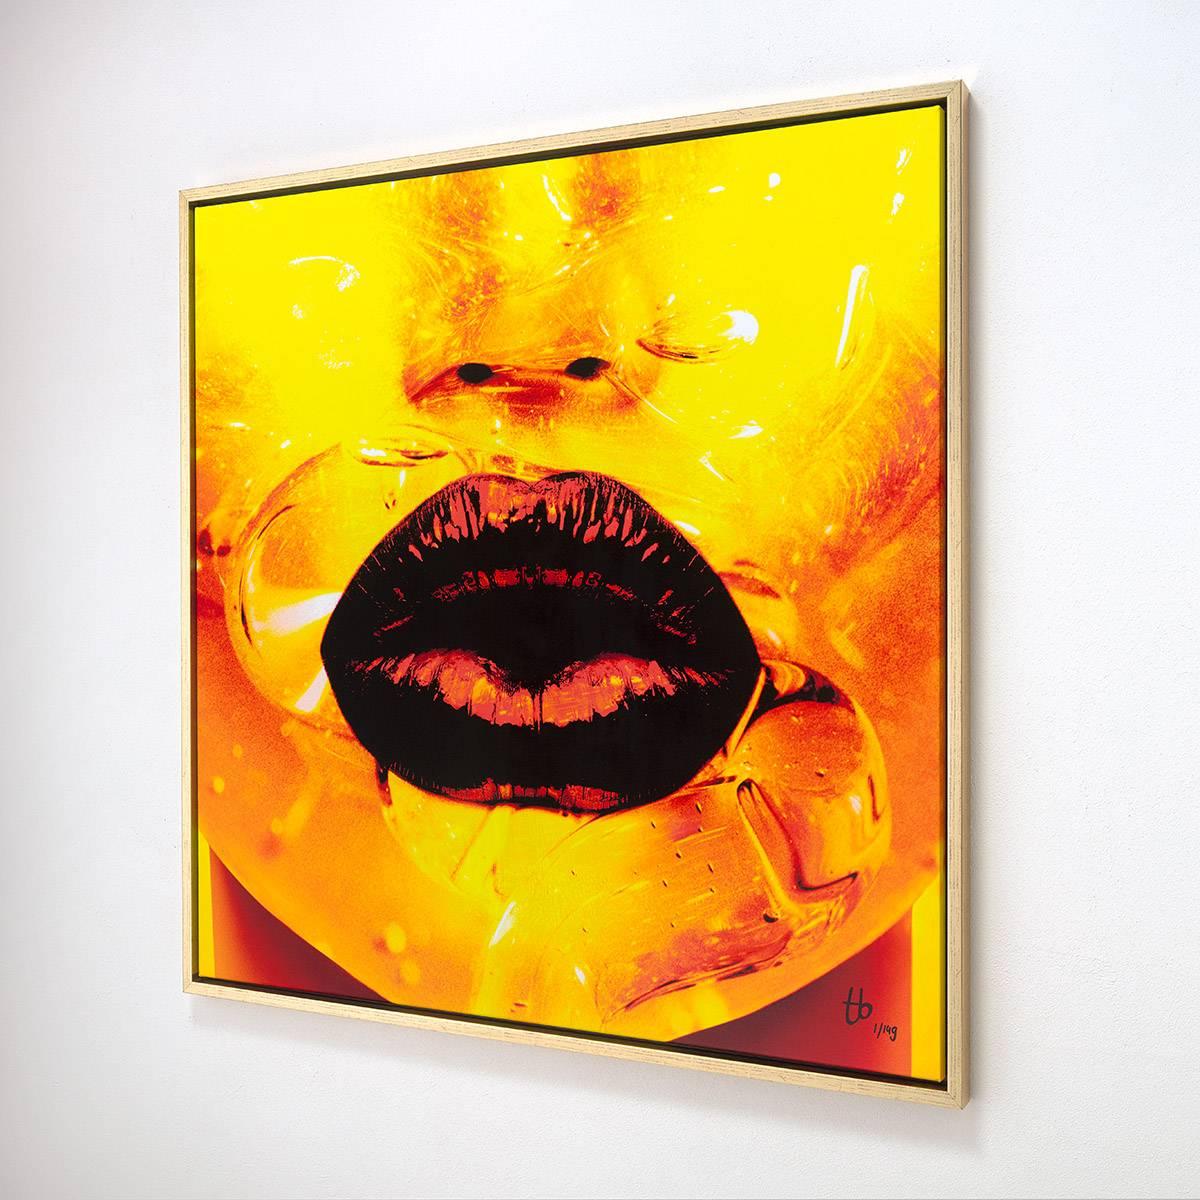 Too Much Talk I - Limited Gold Edition of 149 - Pop Art Photograph by Thomas Bijen